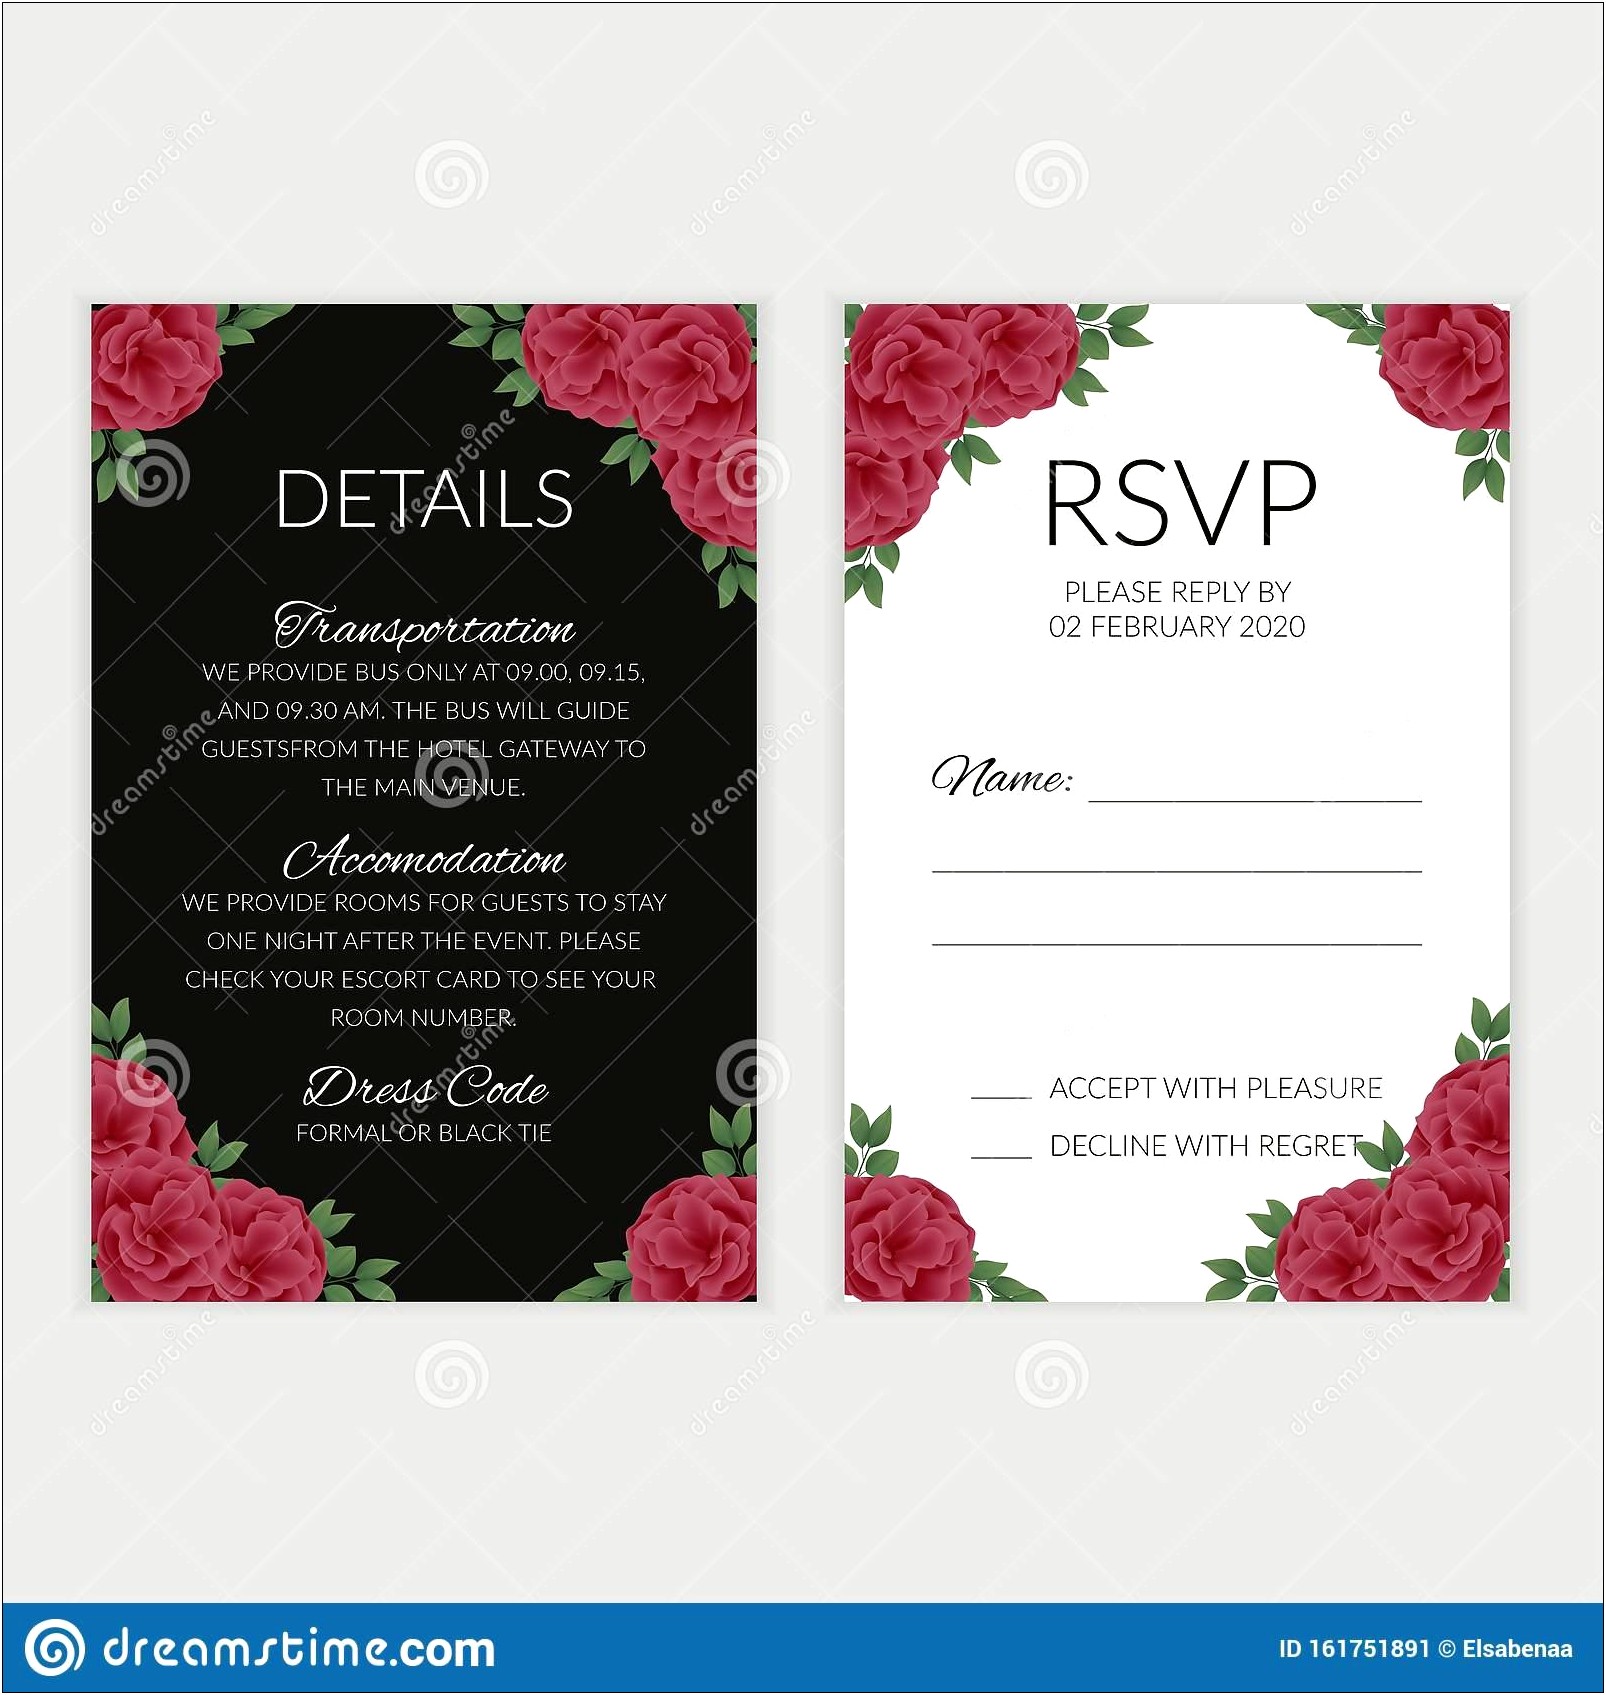 Wedding Hotel Information Card Template Free